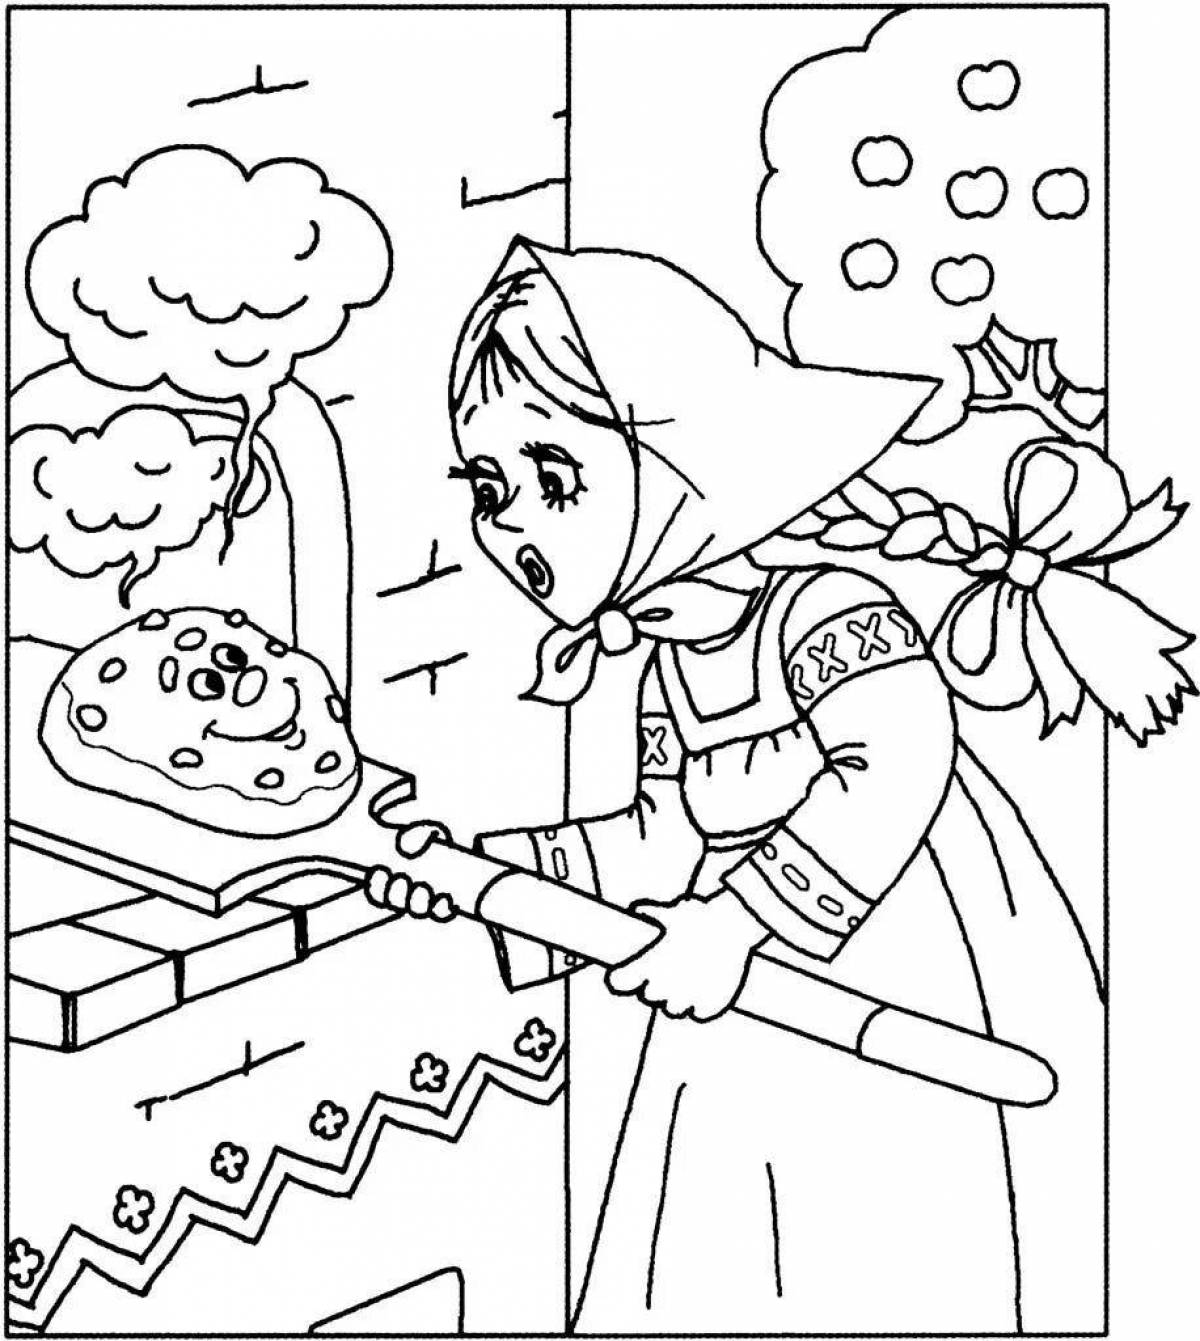 Cute needlewoman and sloth coloring book